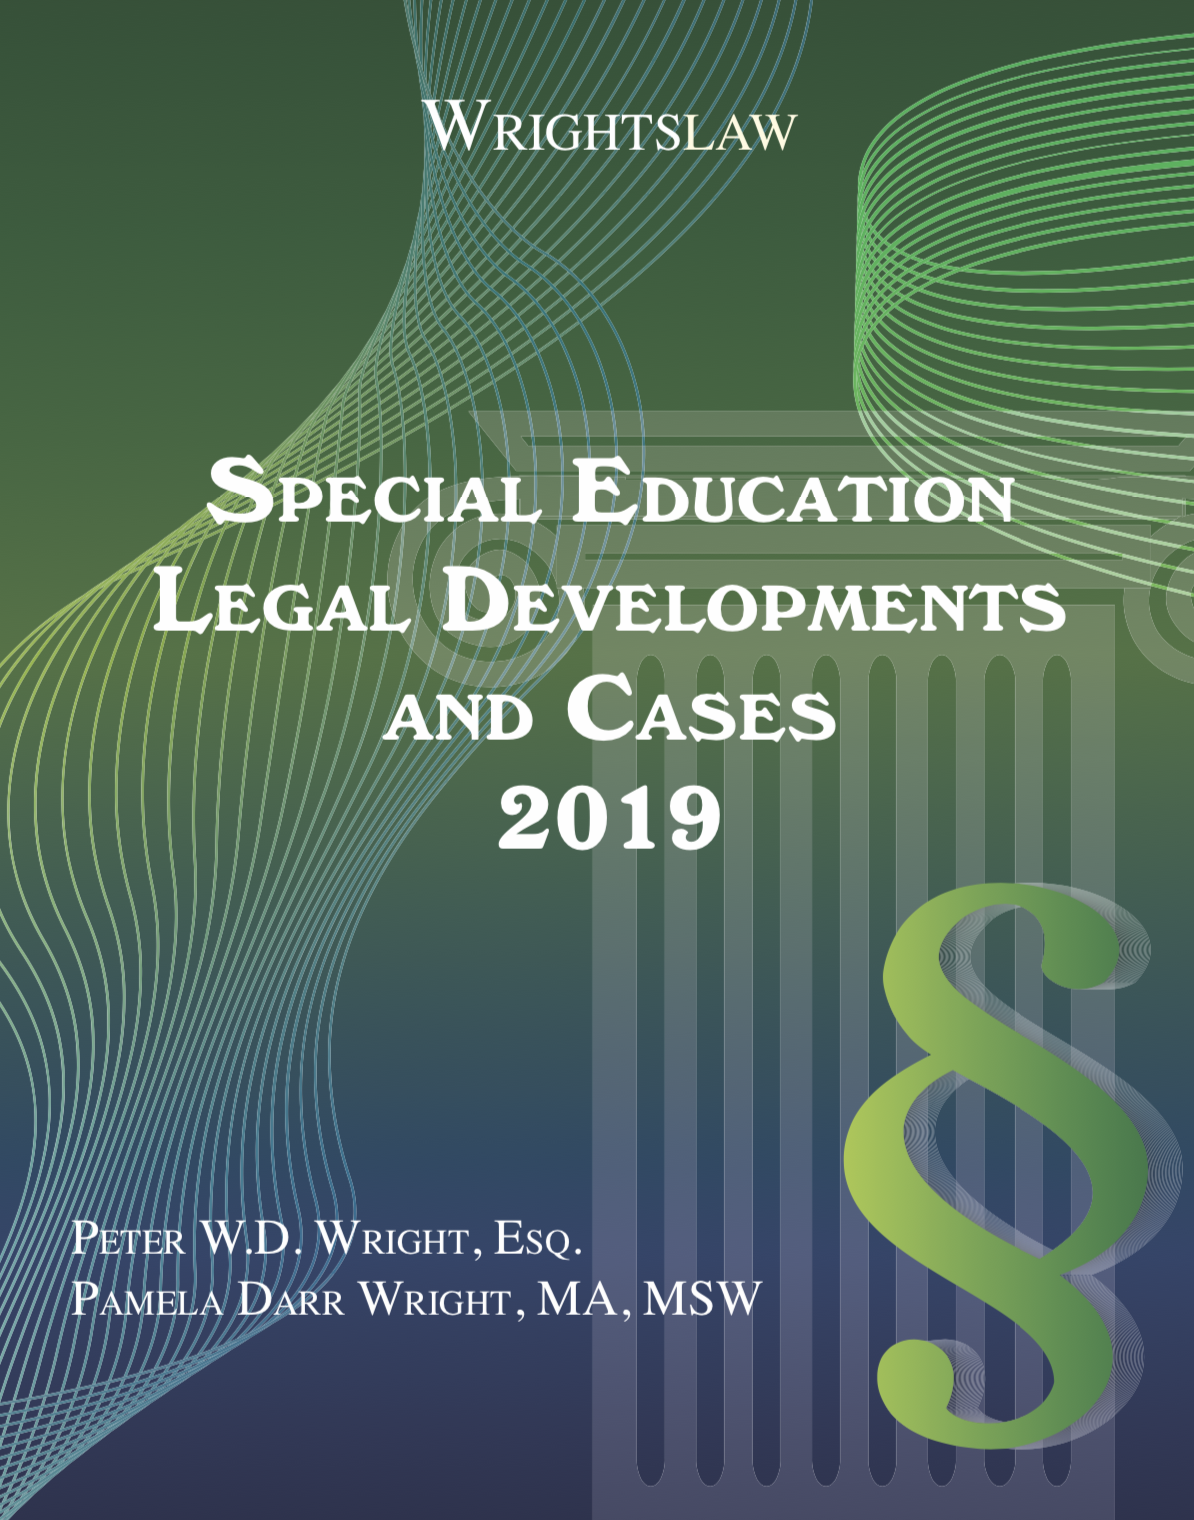 Wrightslaw: Special Education Legal Developments and Cases 2019